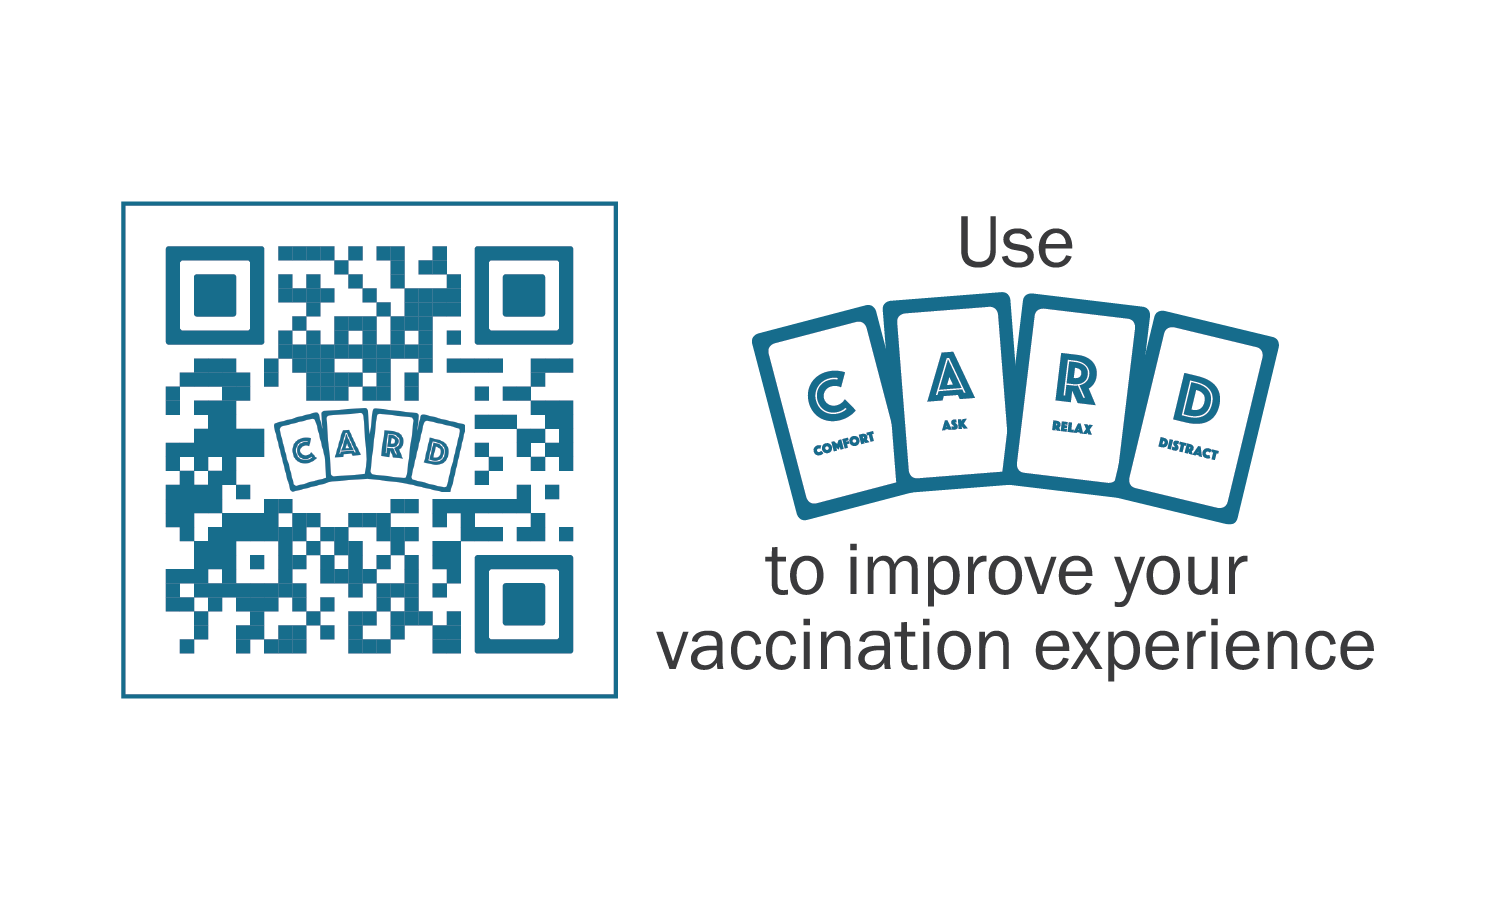 Use CARD to improve your vaccination experience - QR code